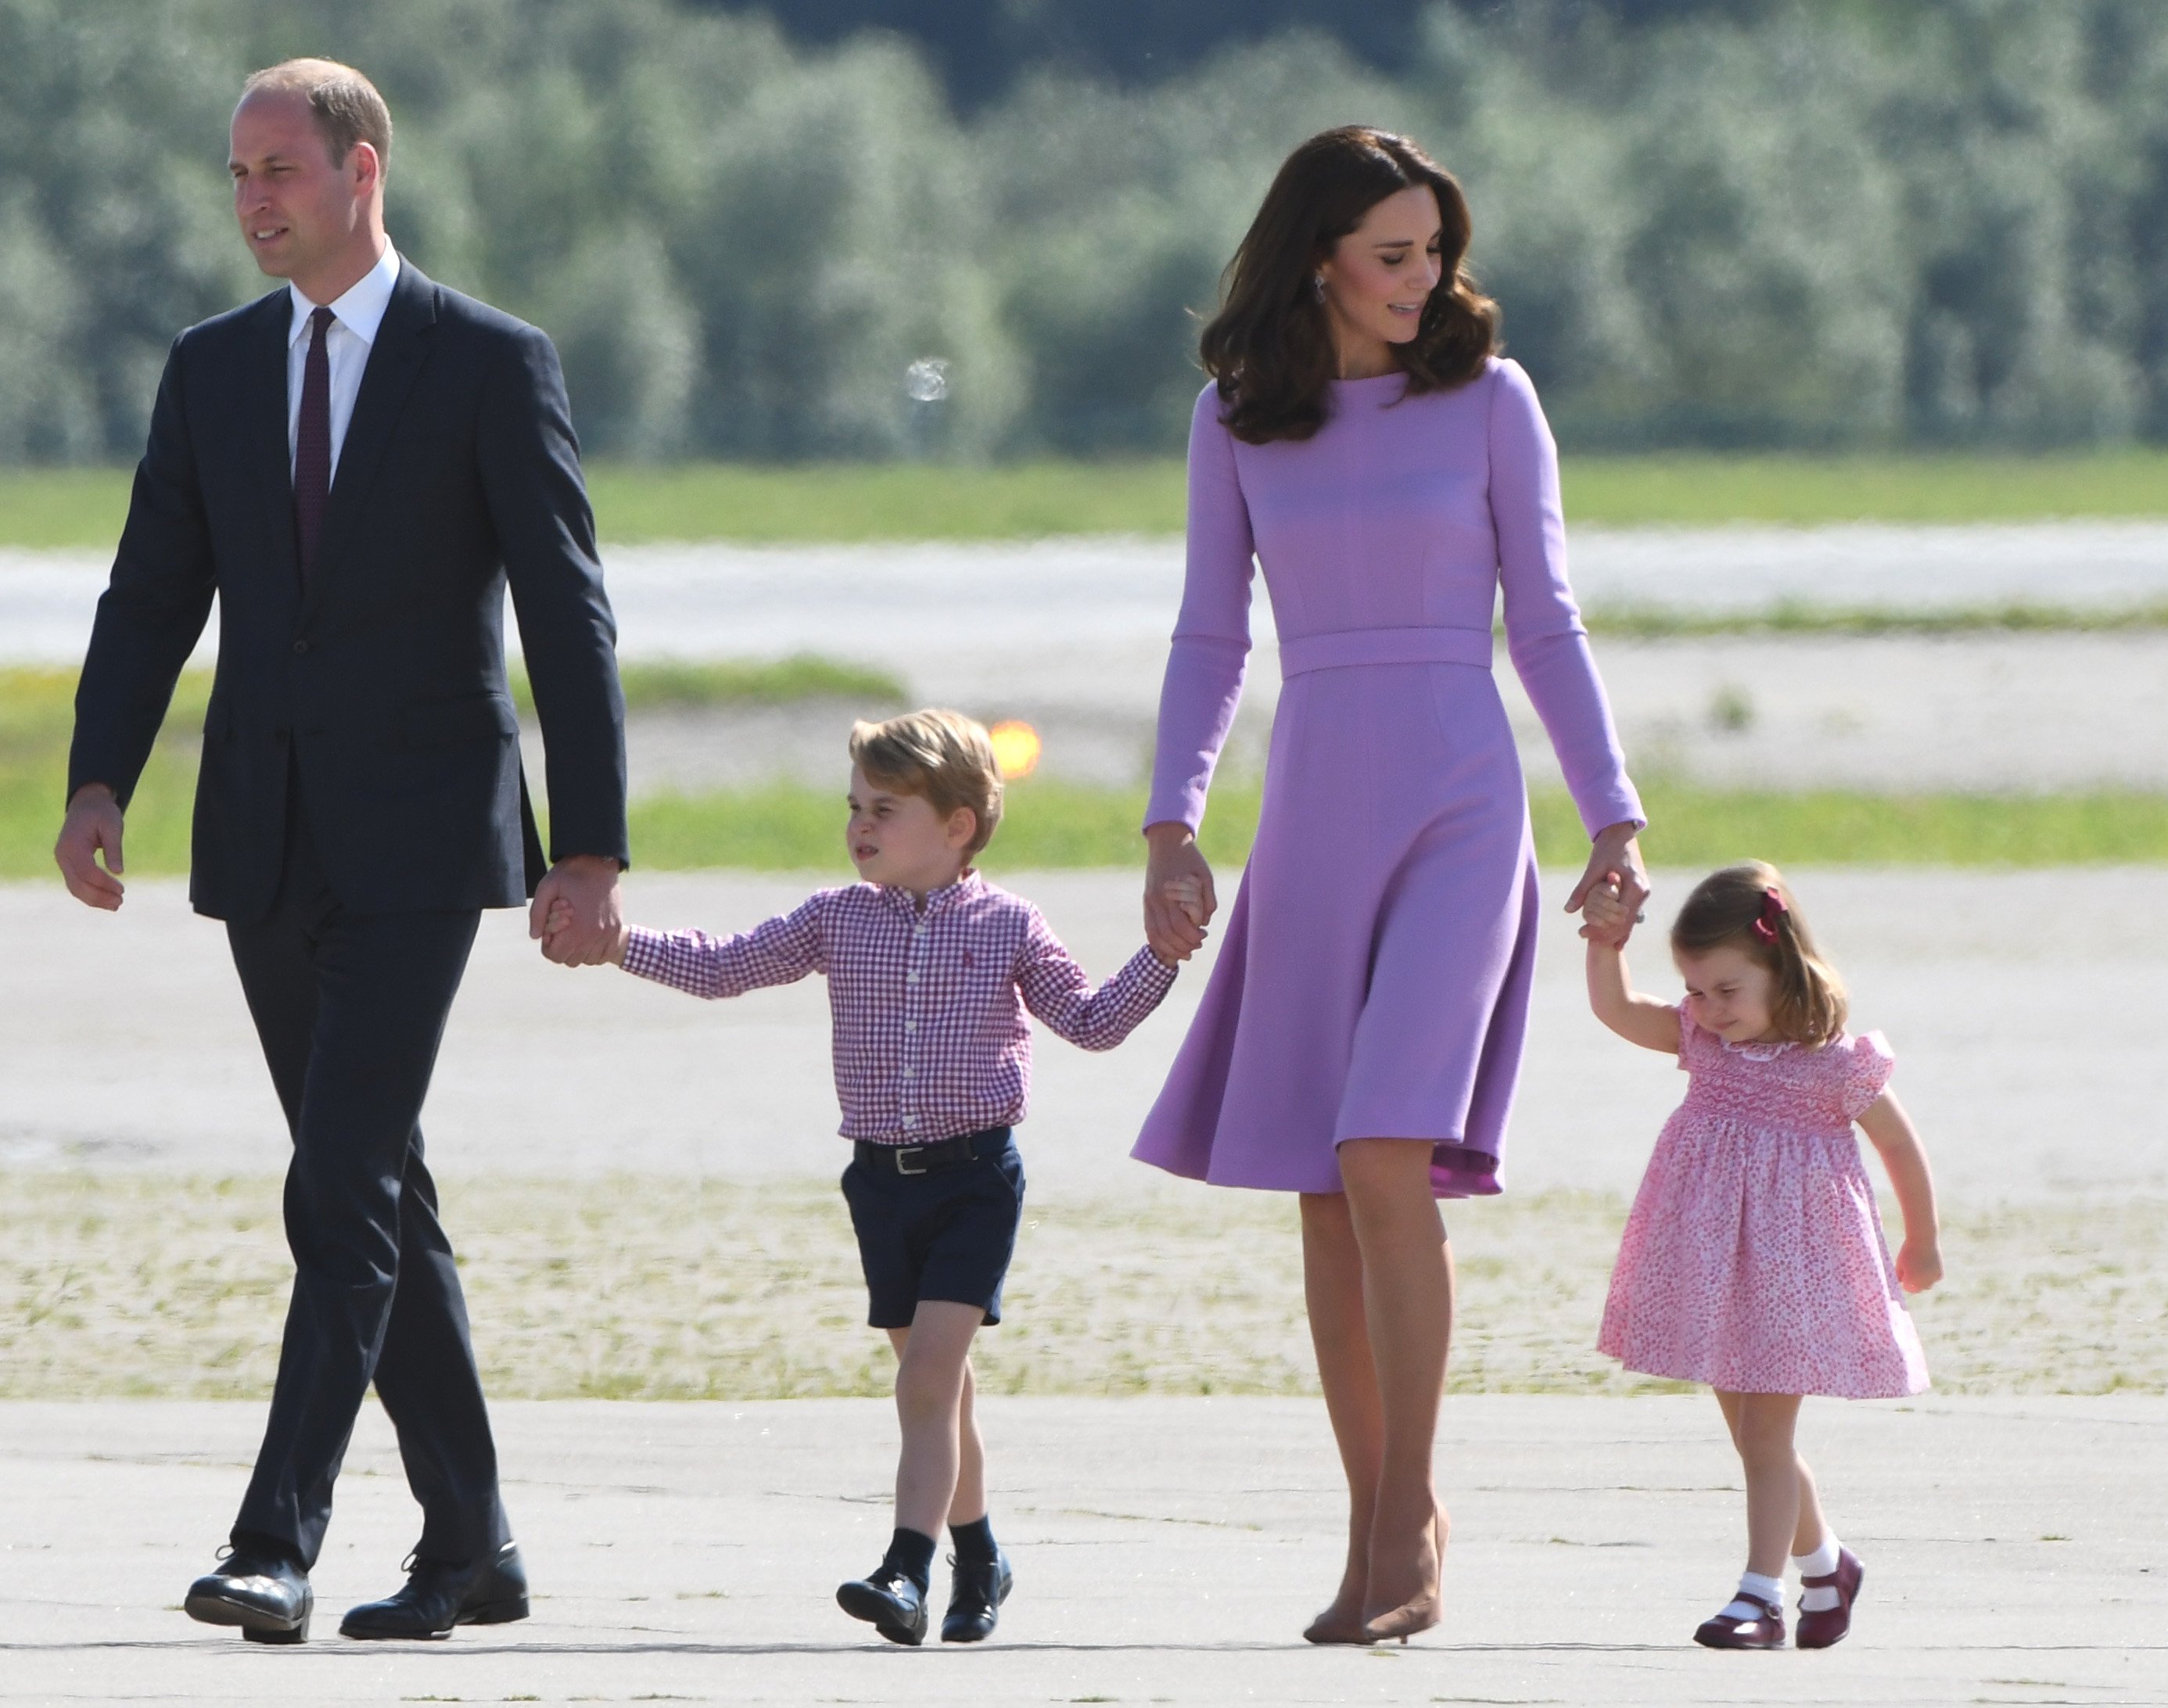 Prince William and his wife Kate Middleton and their children Prince George and Princess Charlotte in Hamburg, northern Germany, on July 21,2017 | Source: Getty Images